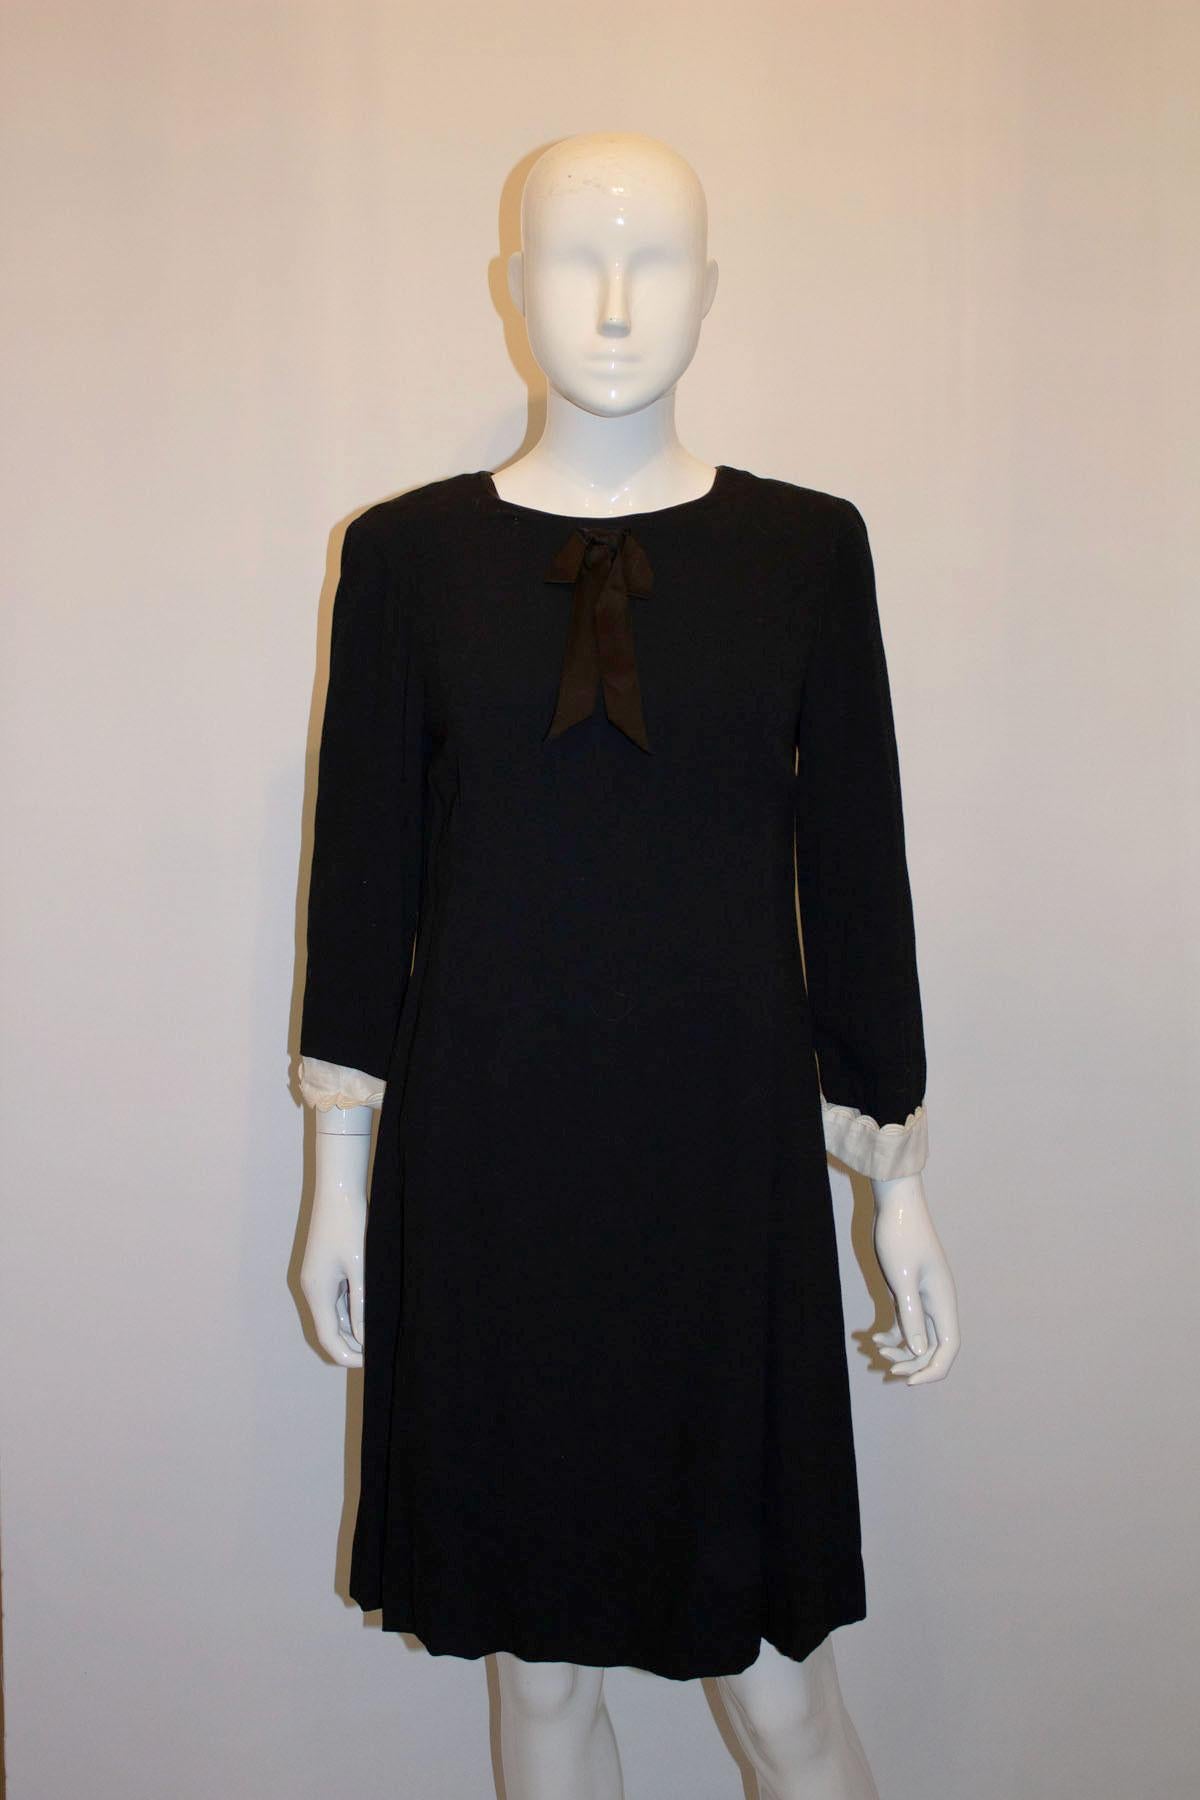 A chic black vintage dress by Susan Small.  The dress has attractive tucks on the front, a central back zip and is fully lined. It has white cuffs on the sleave and satin bow detail.
Measurements: Bust up to 36'', length 37''